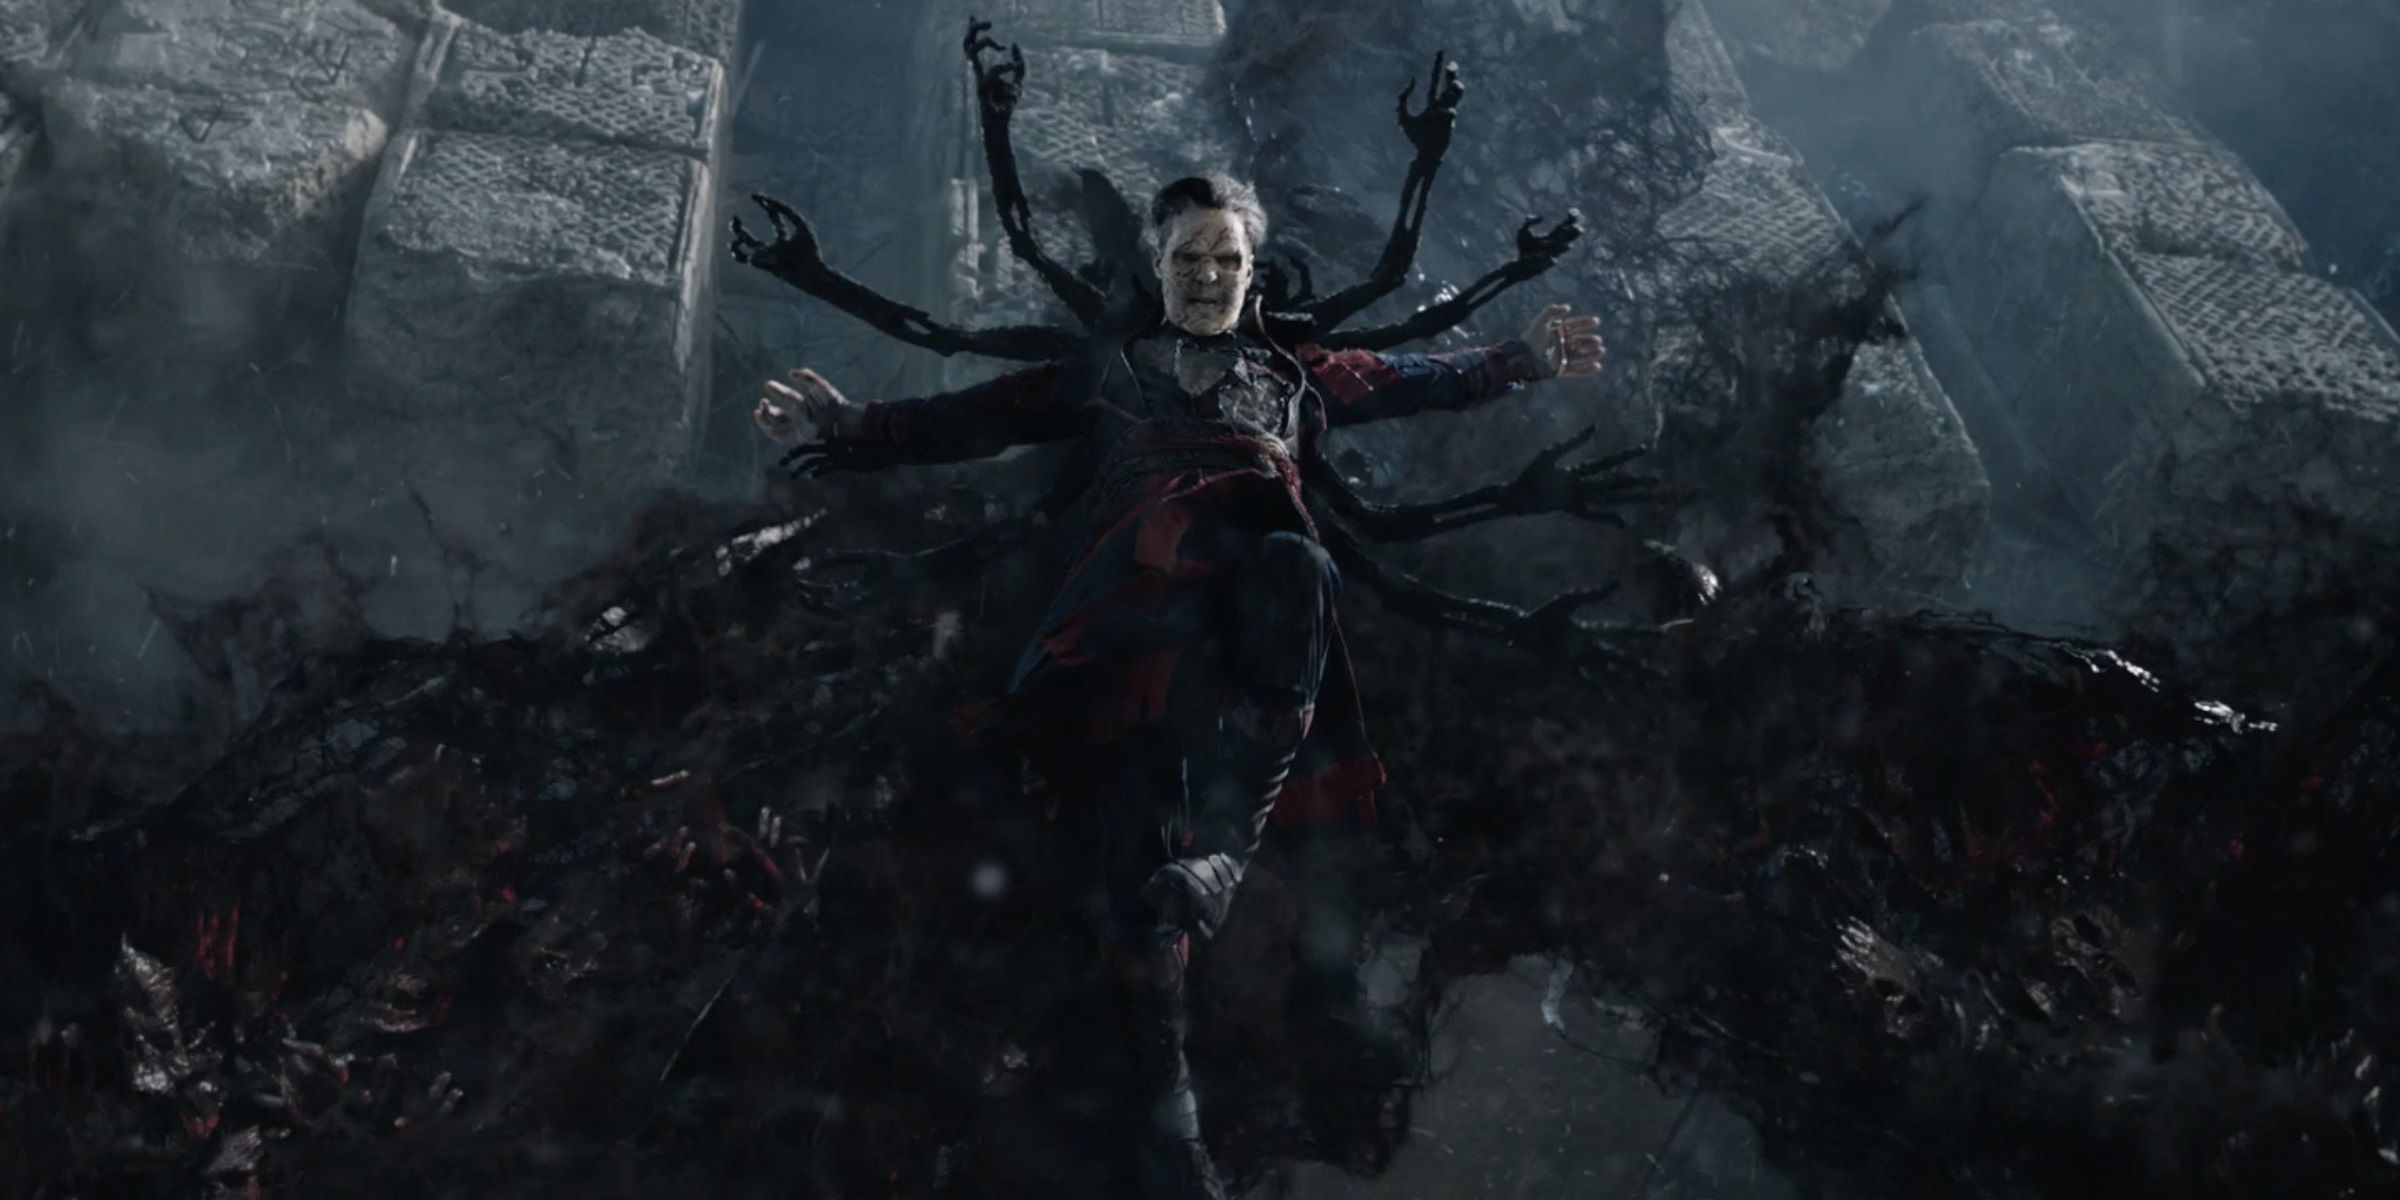 Zombie Strange in the final battle of Doctor Strange in the Multiverse of Madness